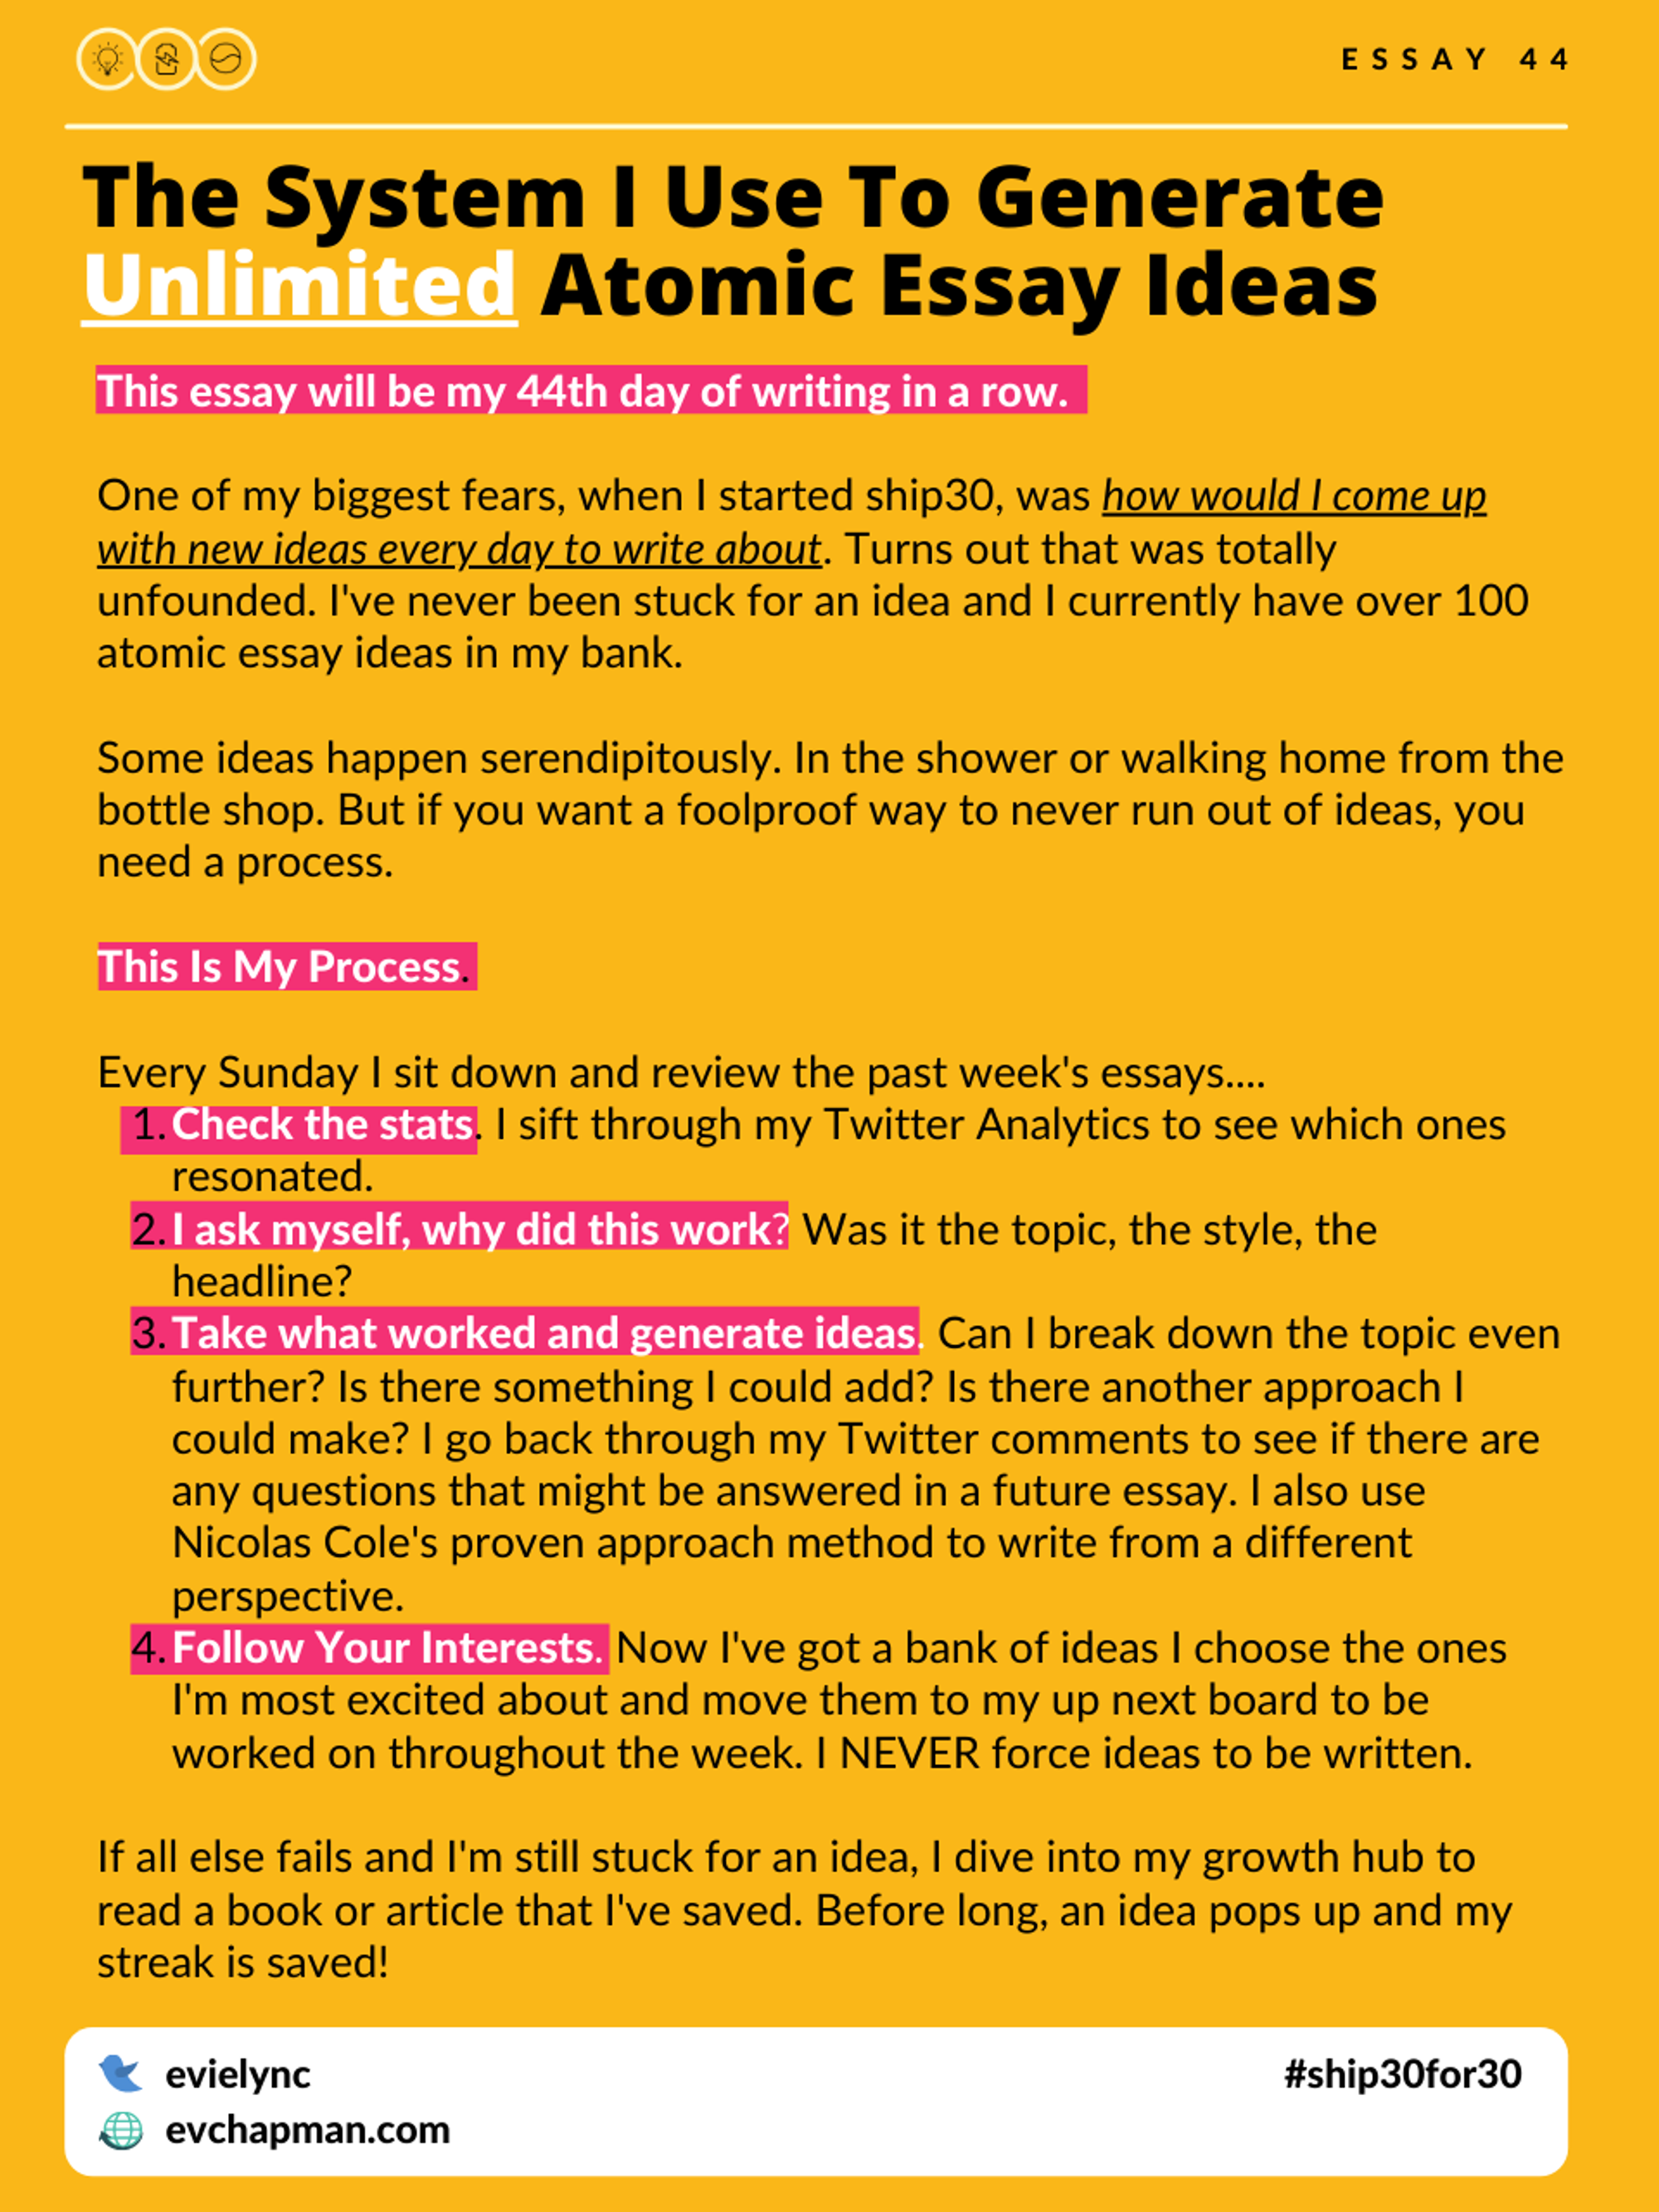 The System I Use To Generate Unlimited Atomic Essay Ideas